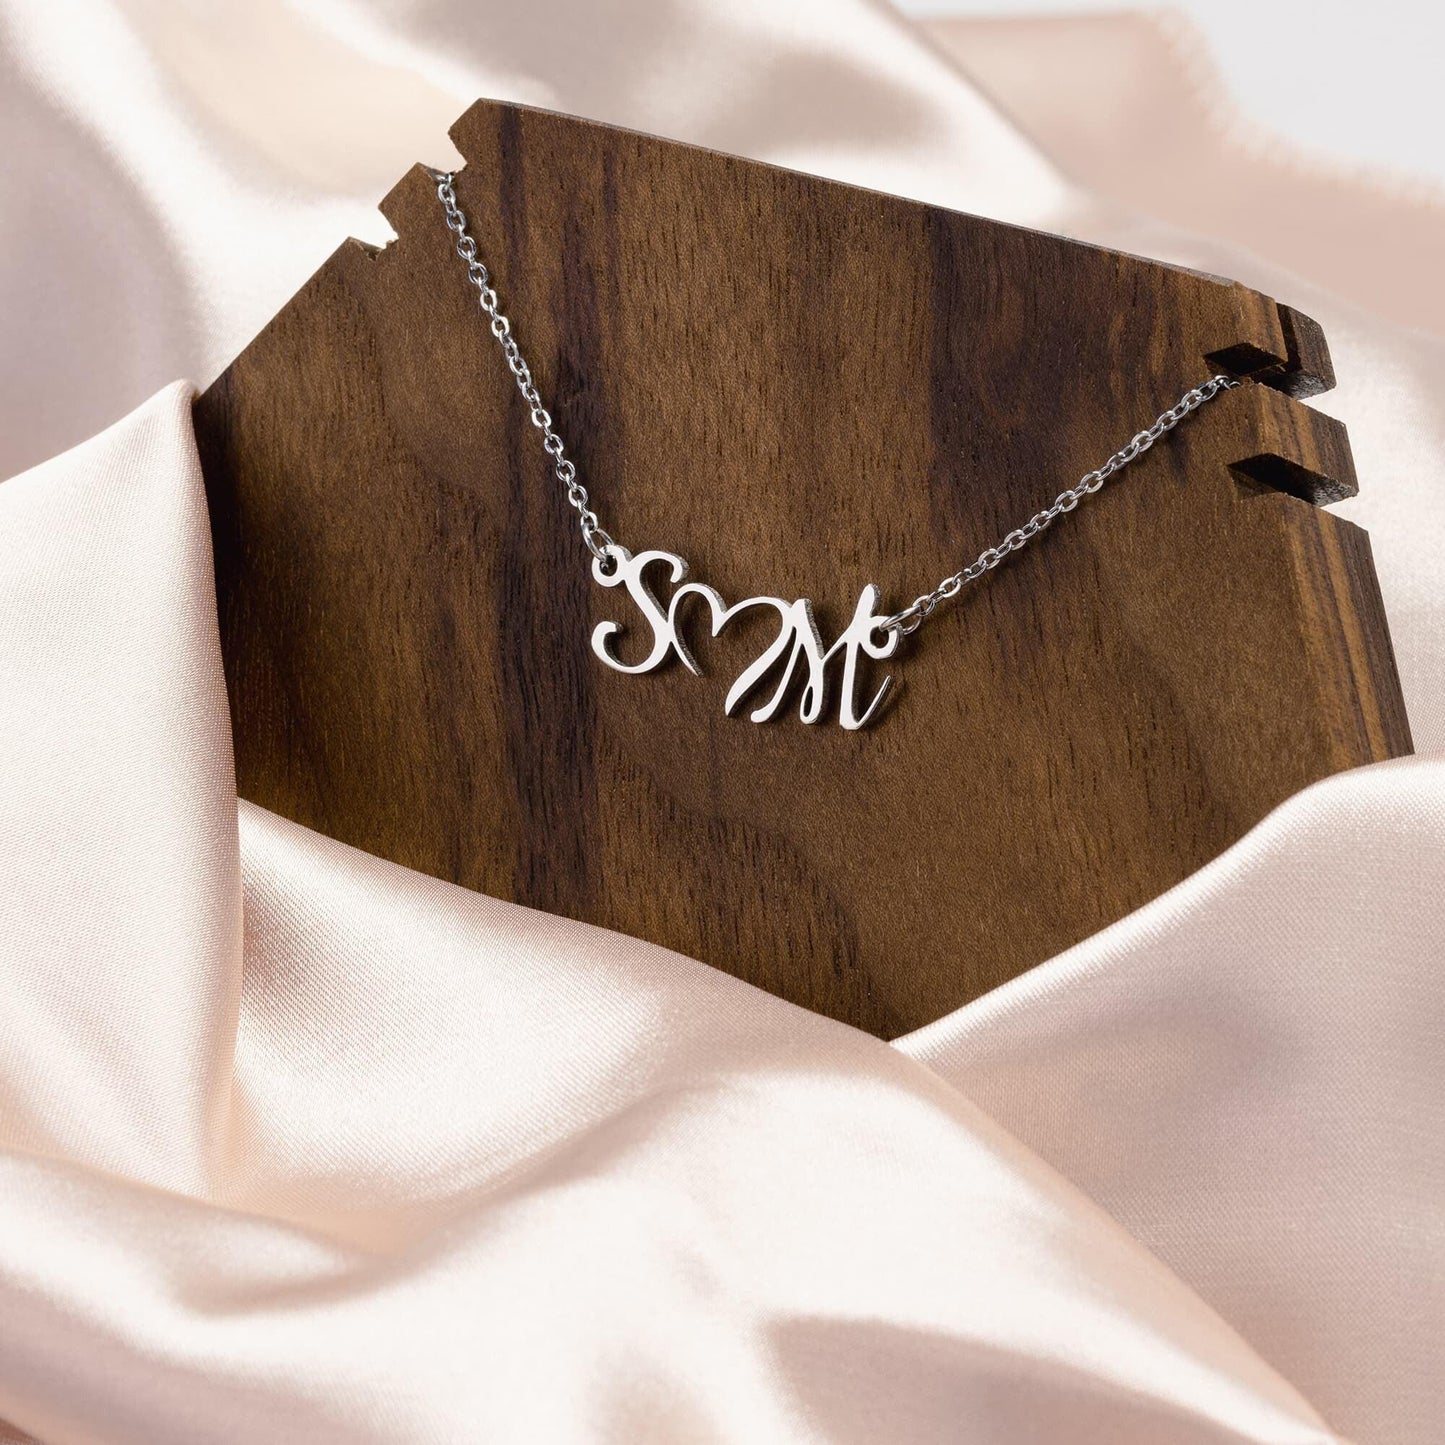 Personalized Double Initial Heart Necklace - Mallard Moon Gift Shop